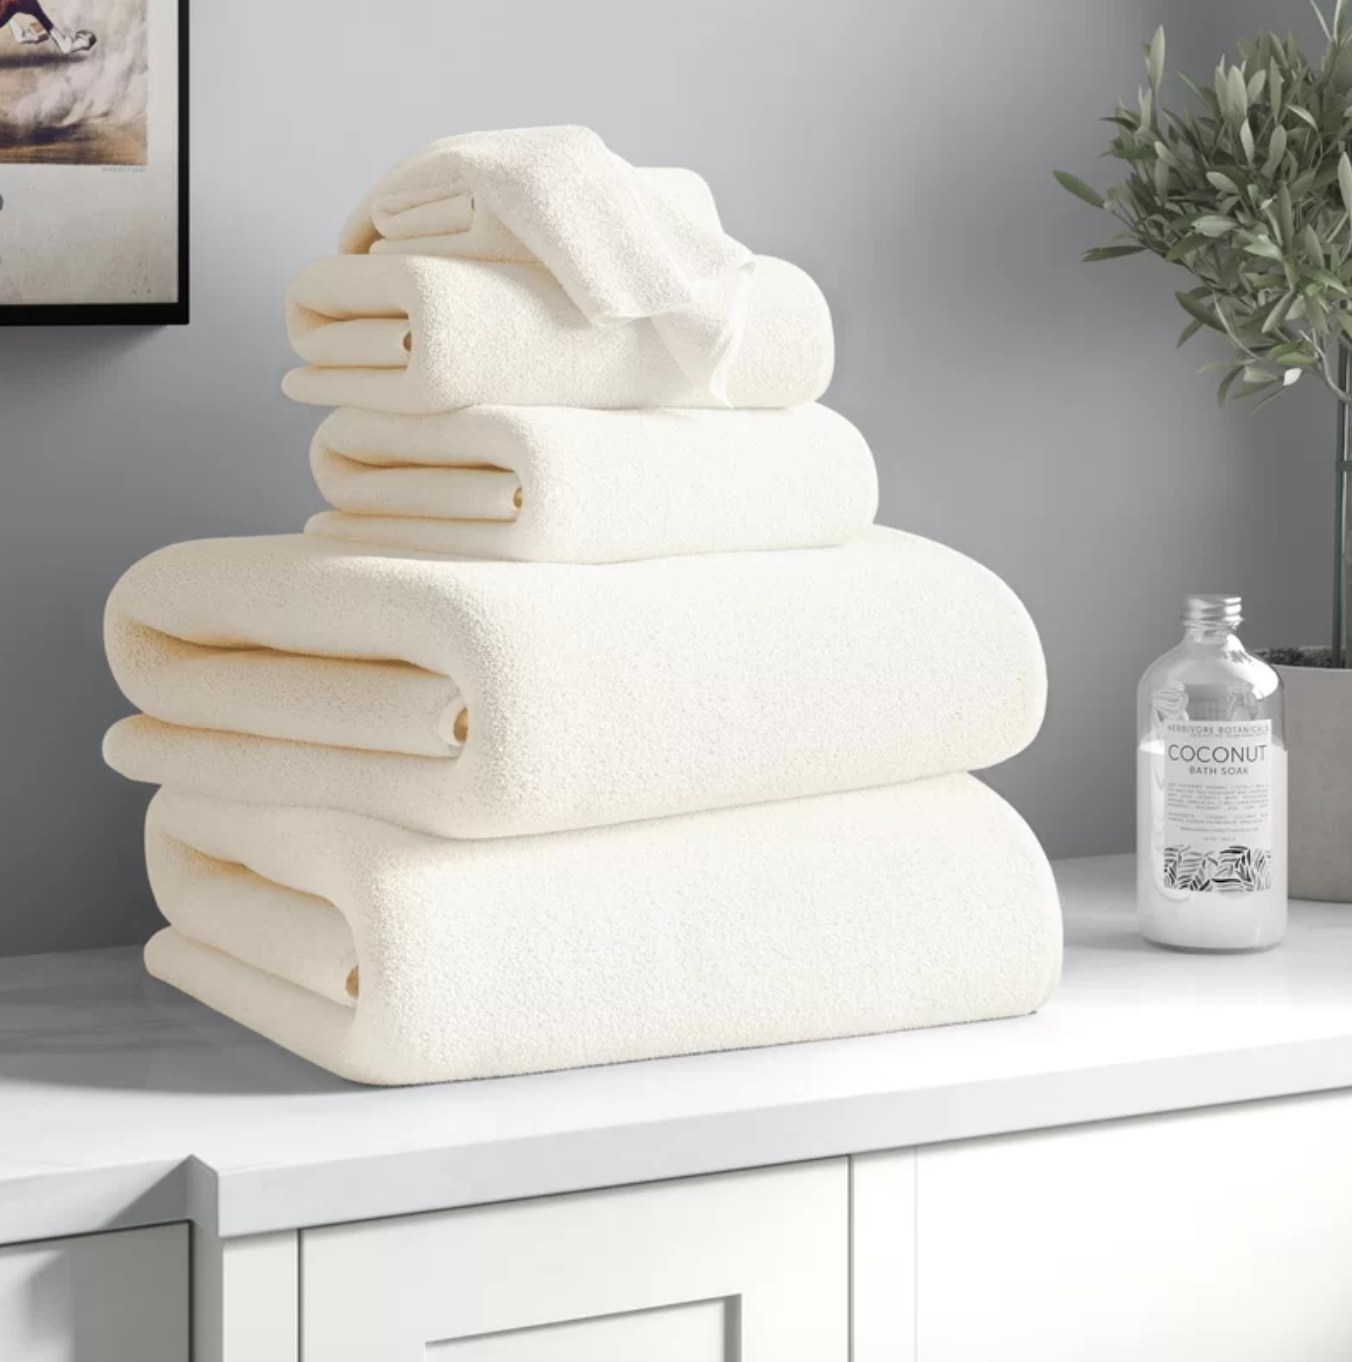 The white towel set stacked on the bathroom counter